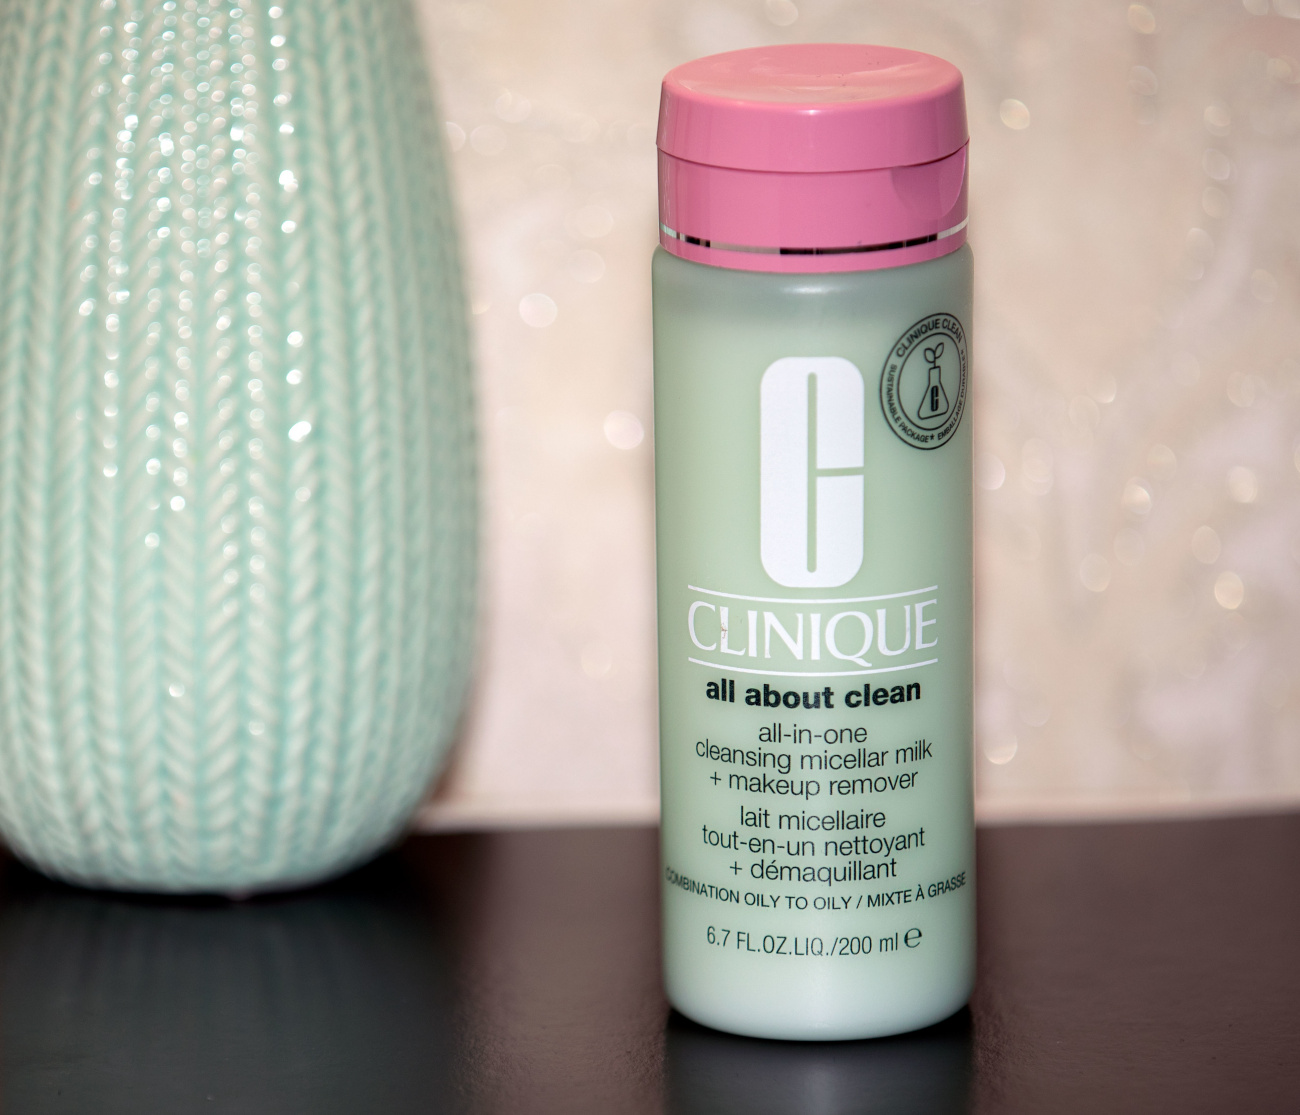 Cleaner 01. Clinique all about clean all-in-one Cleansing отзывы. Lulo clean one Bold.